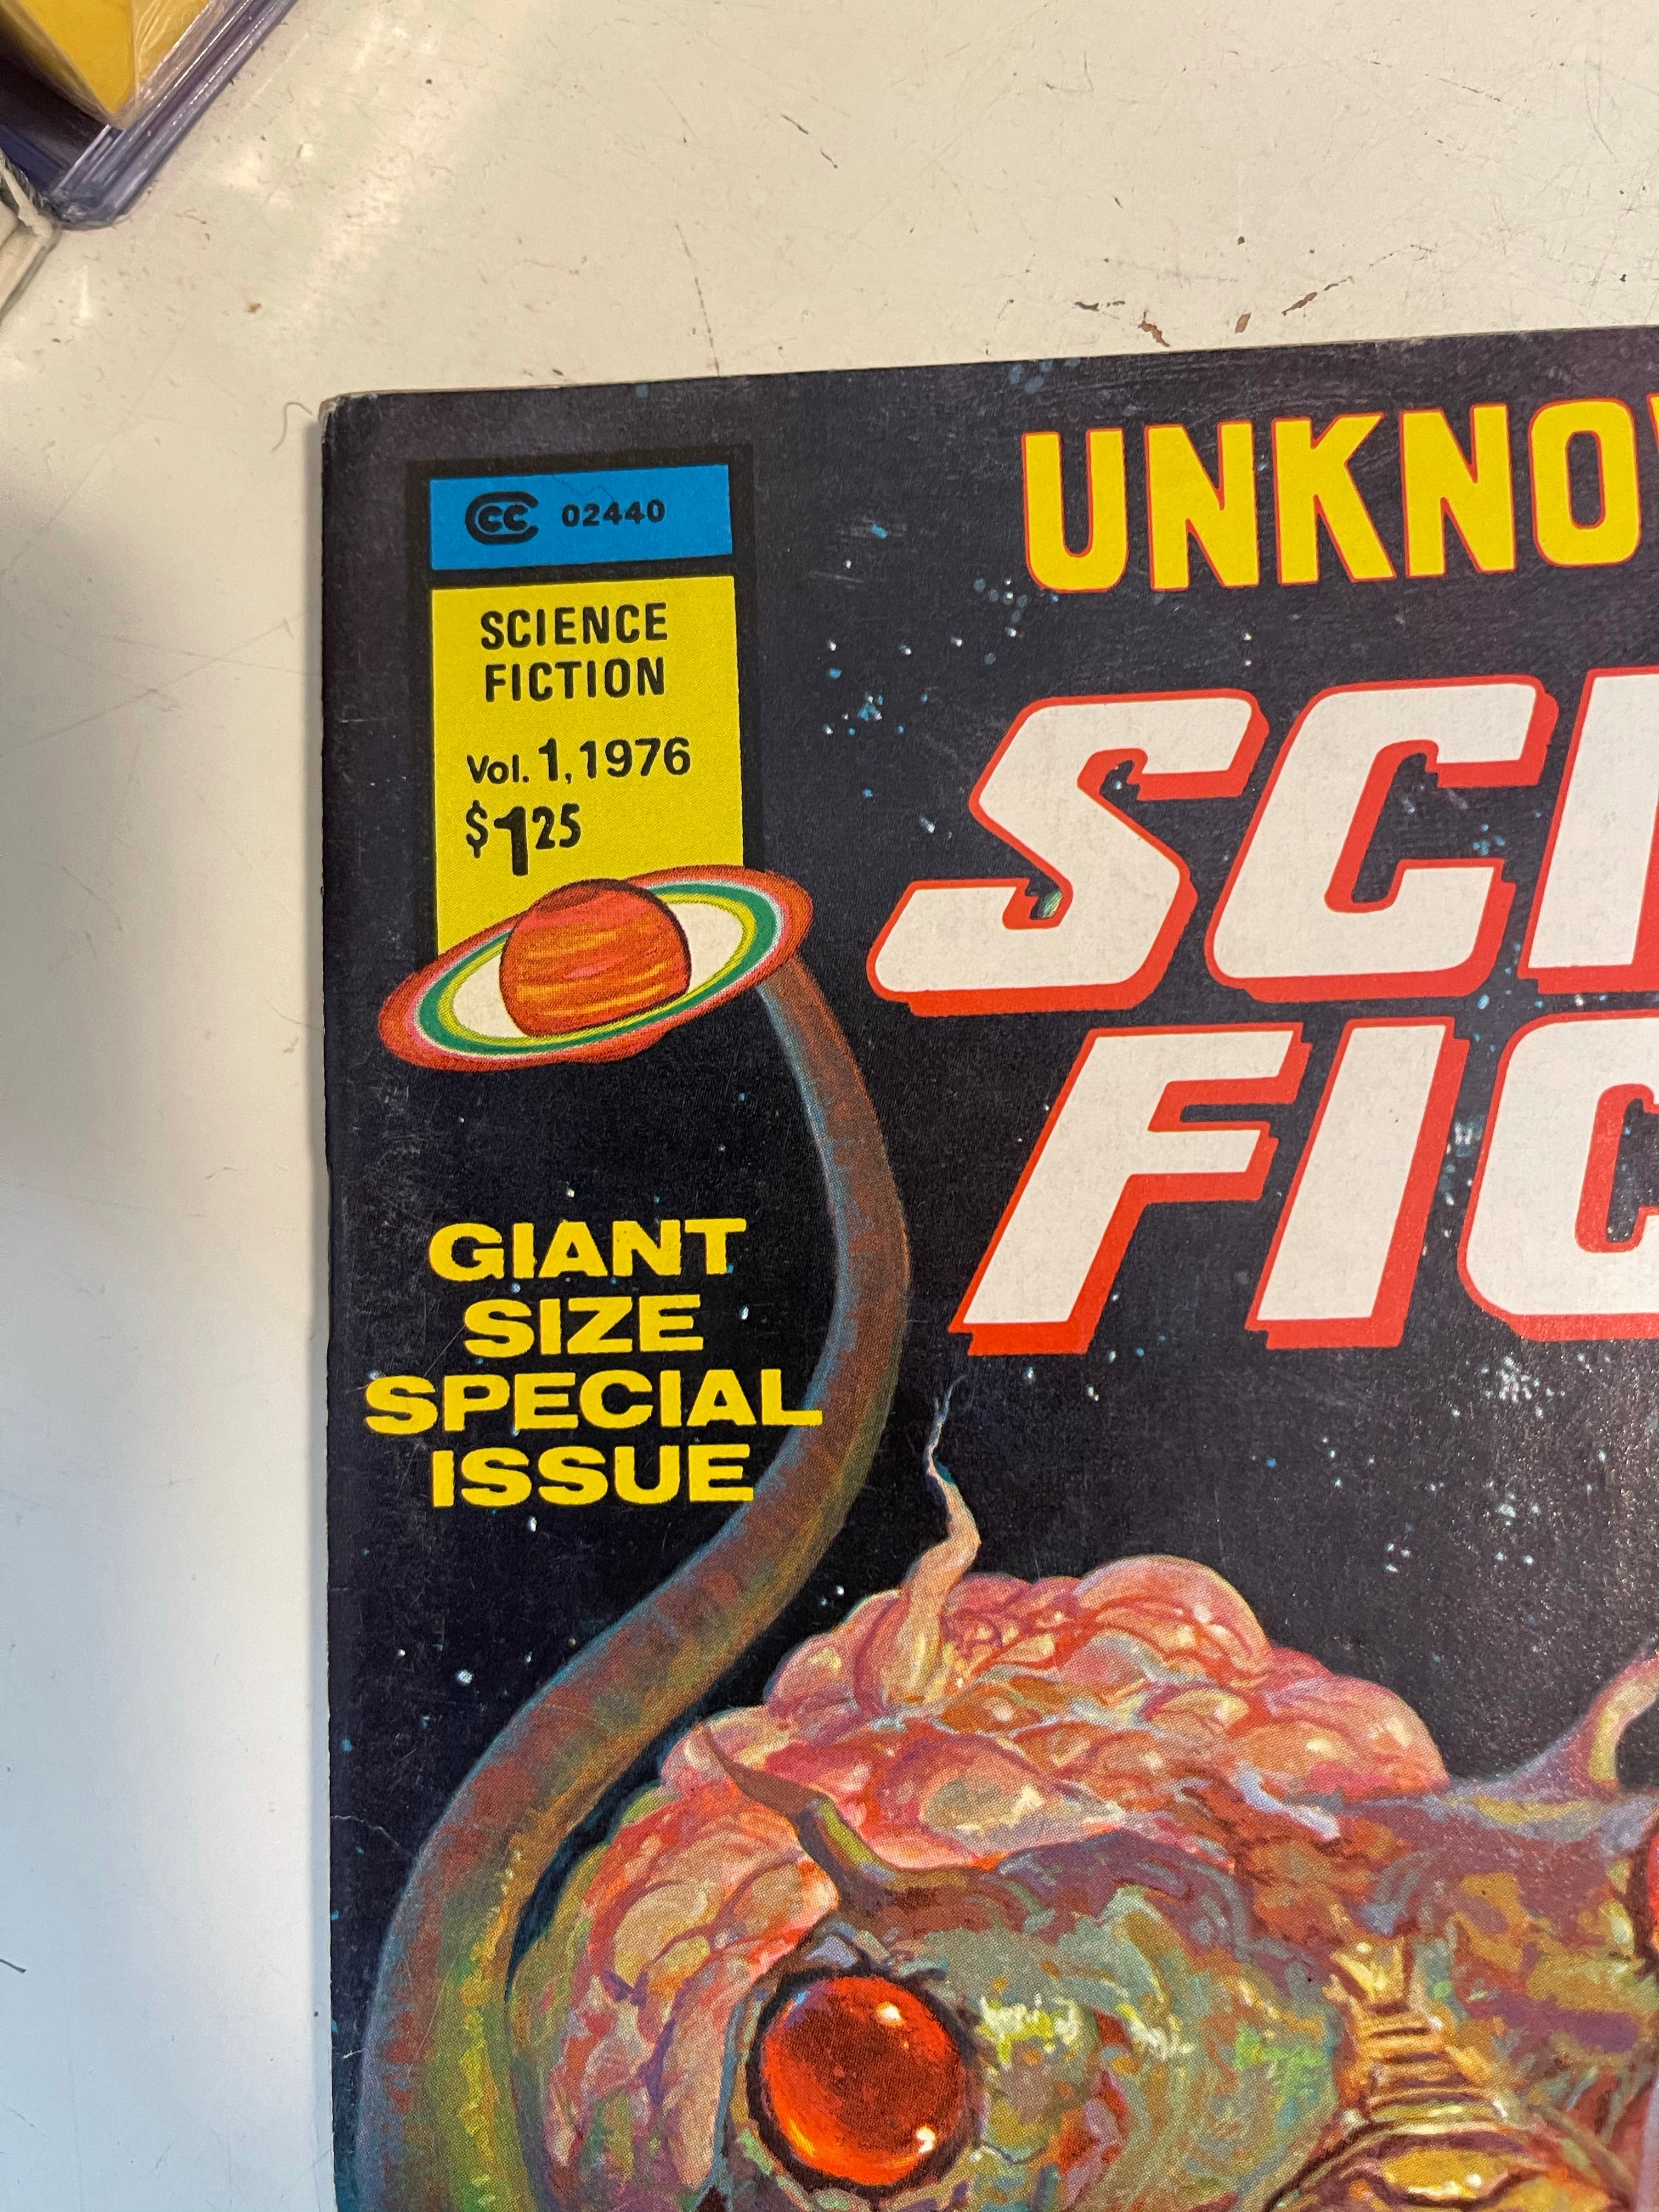 Unknown Worlds of Science Fiction #1 Vf comic magazine 1976